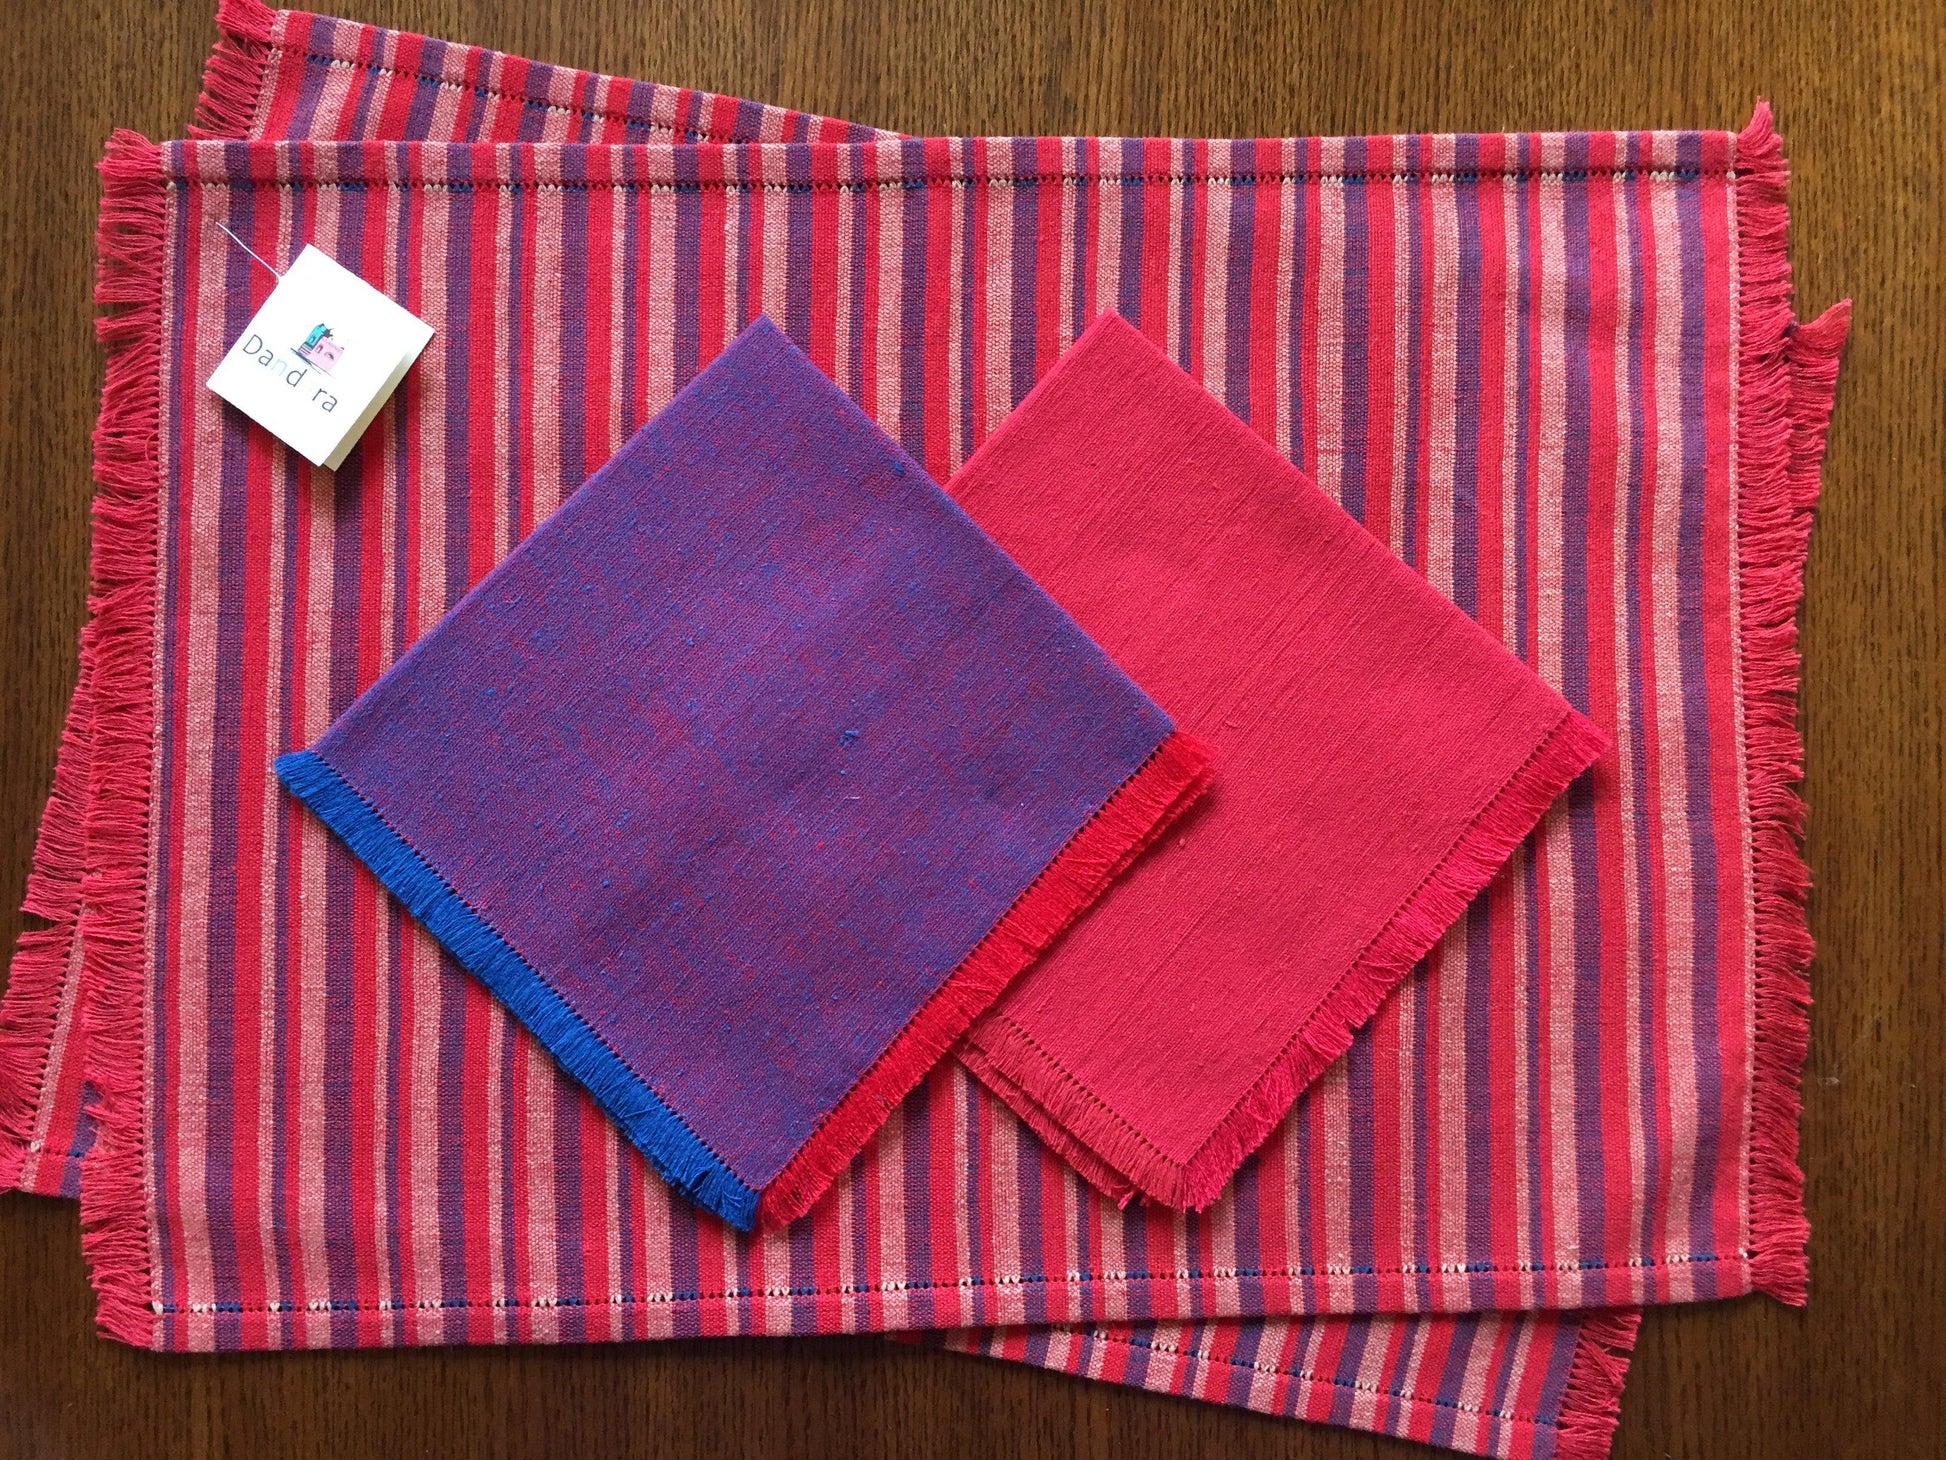 Handwoven Placemats & Napkins - Red & Navy Blue